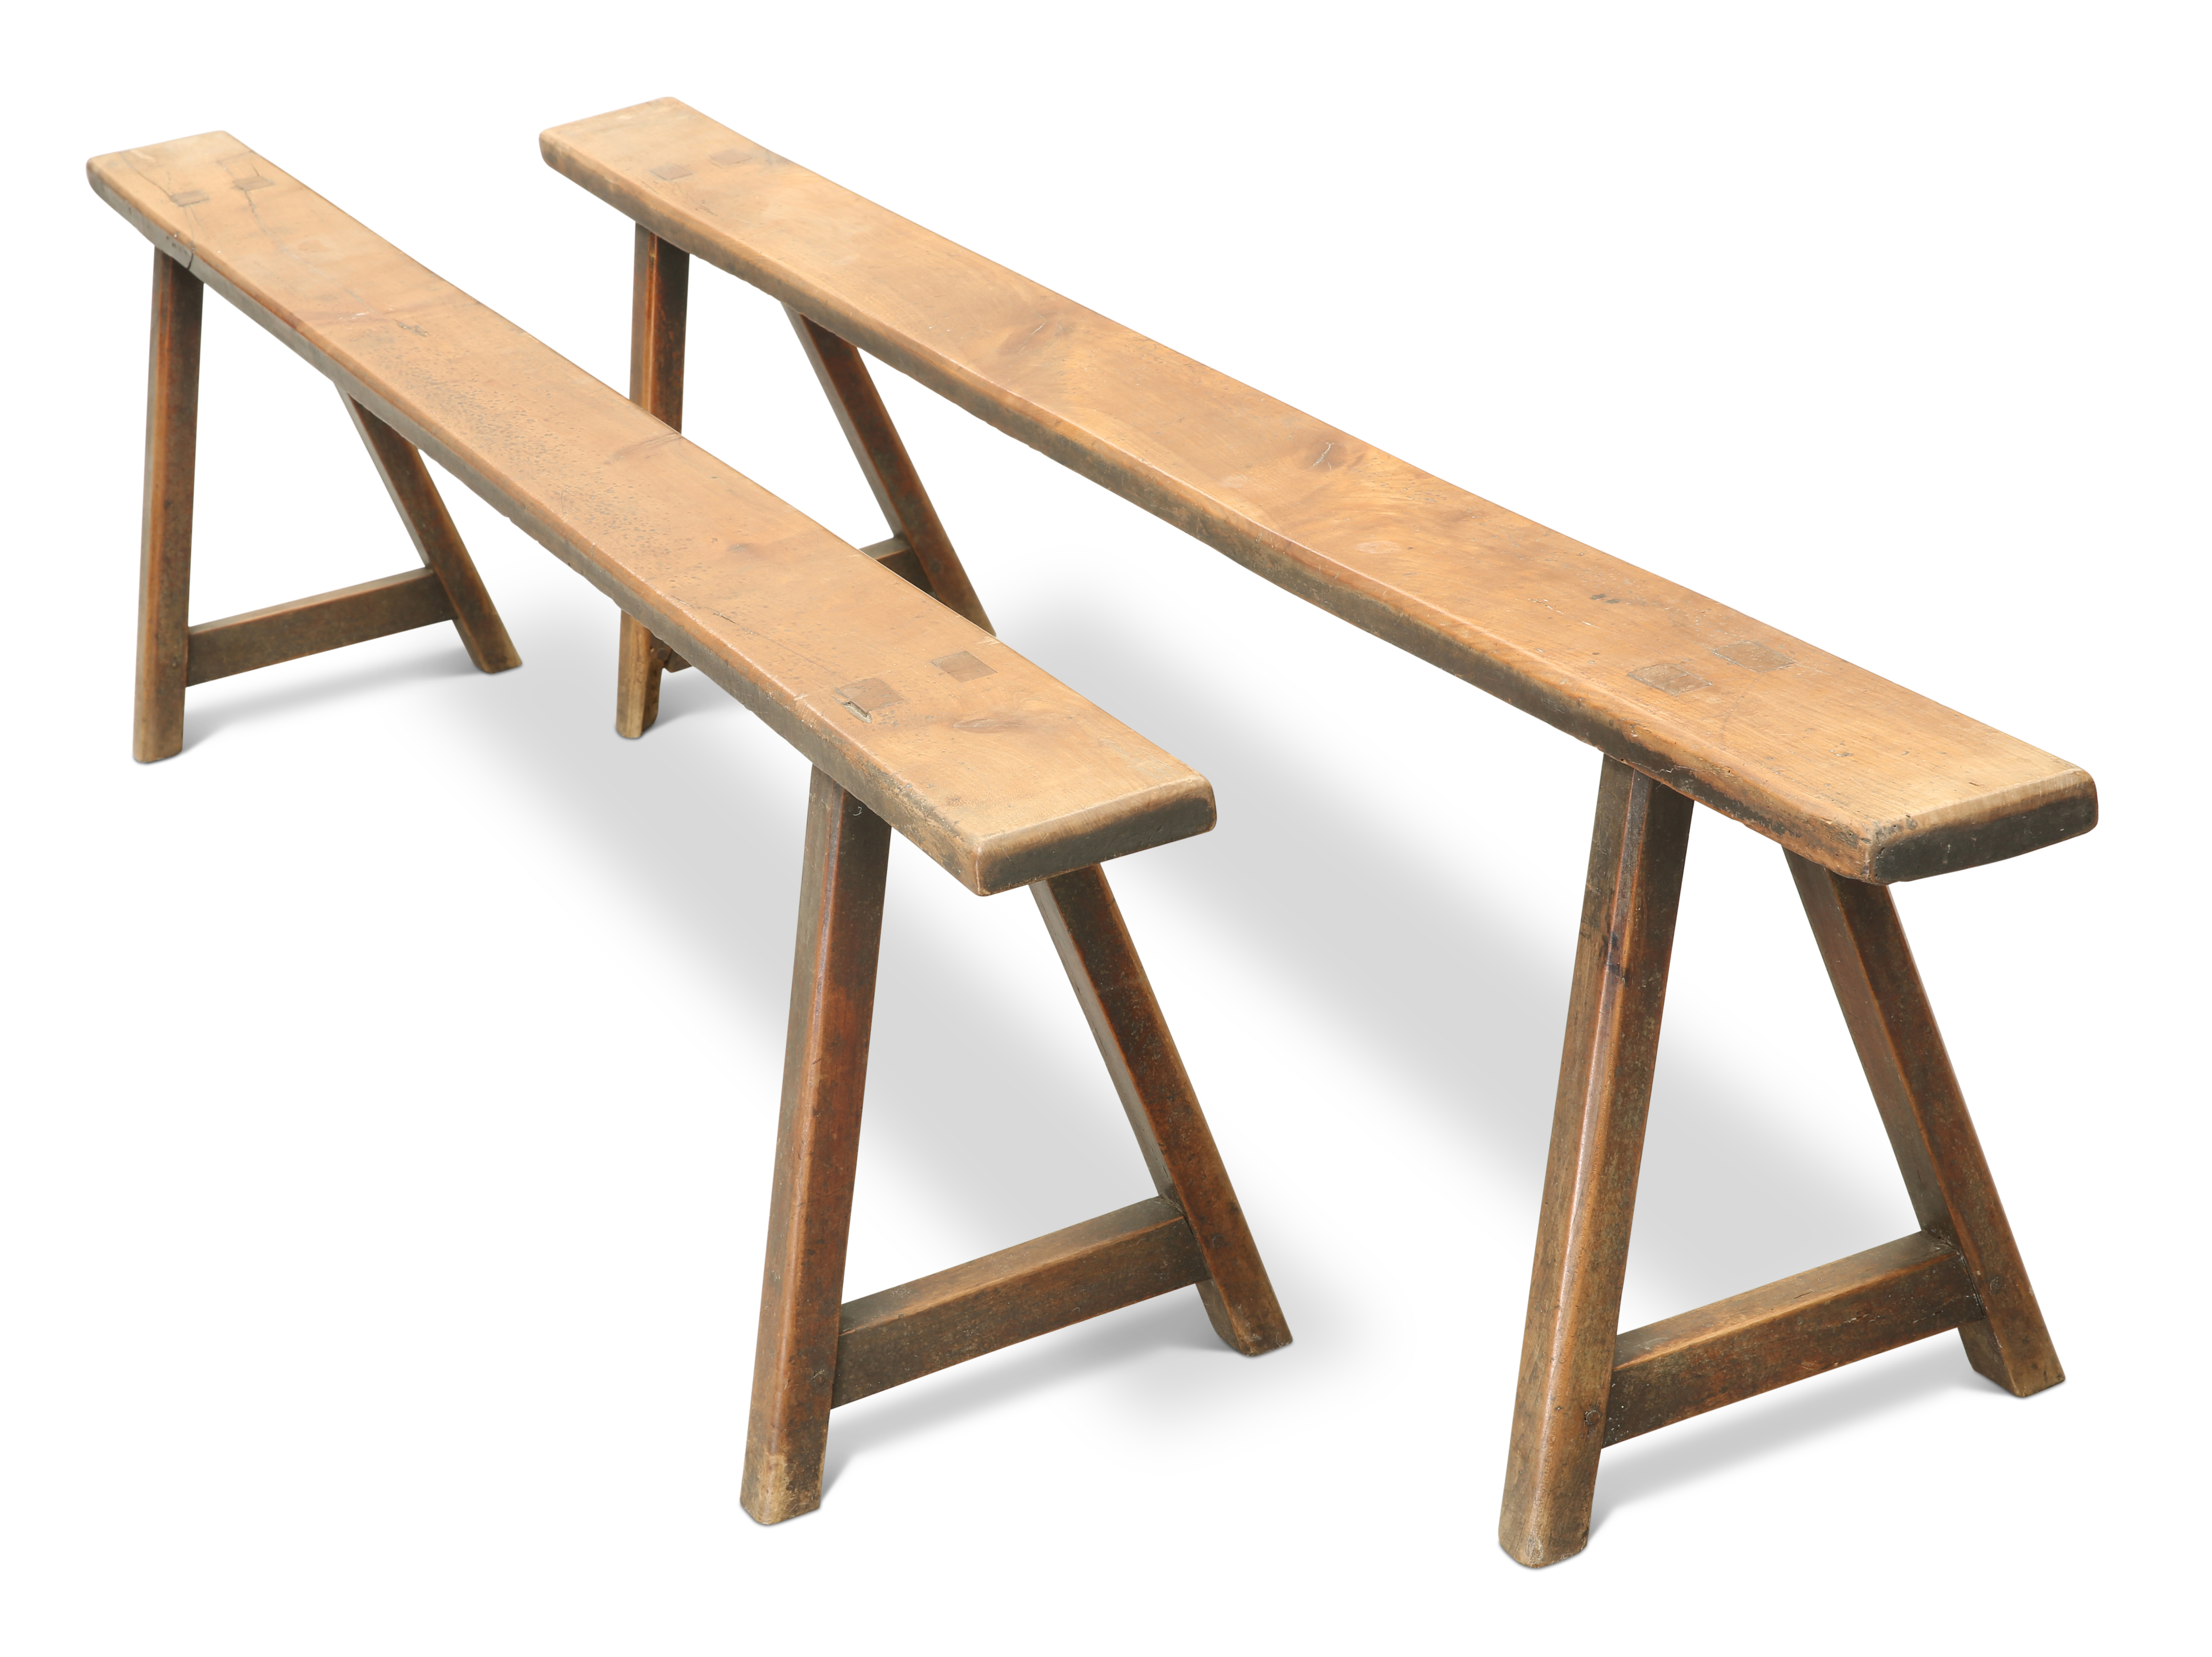 A PAIR OF 19TH CENTURY FRUITWOOD BENCHES